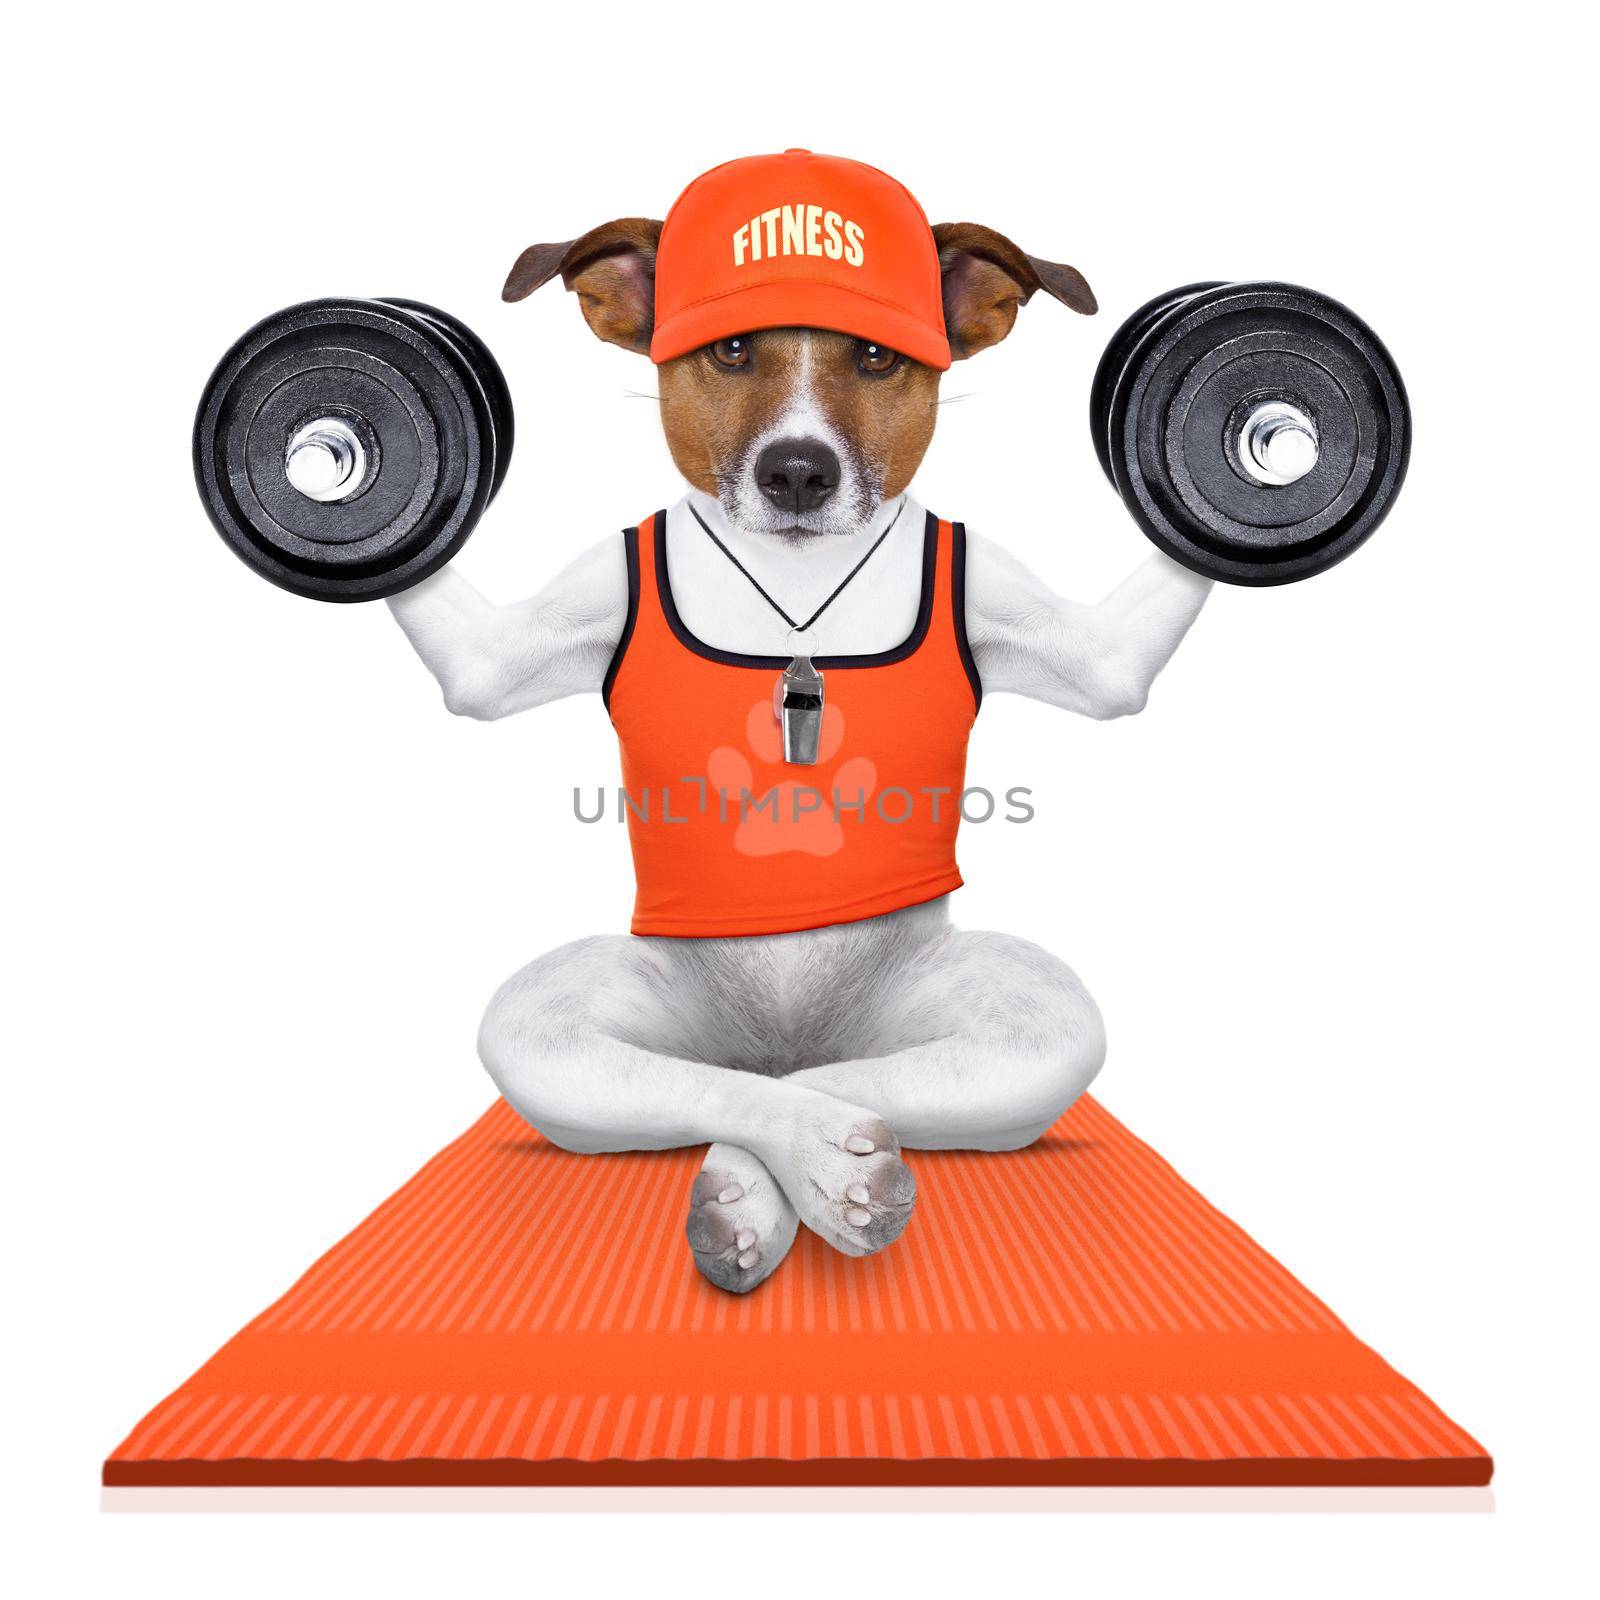 personal trainer dog by Brosch